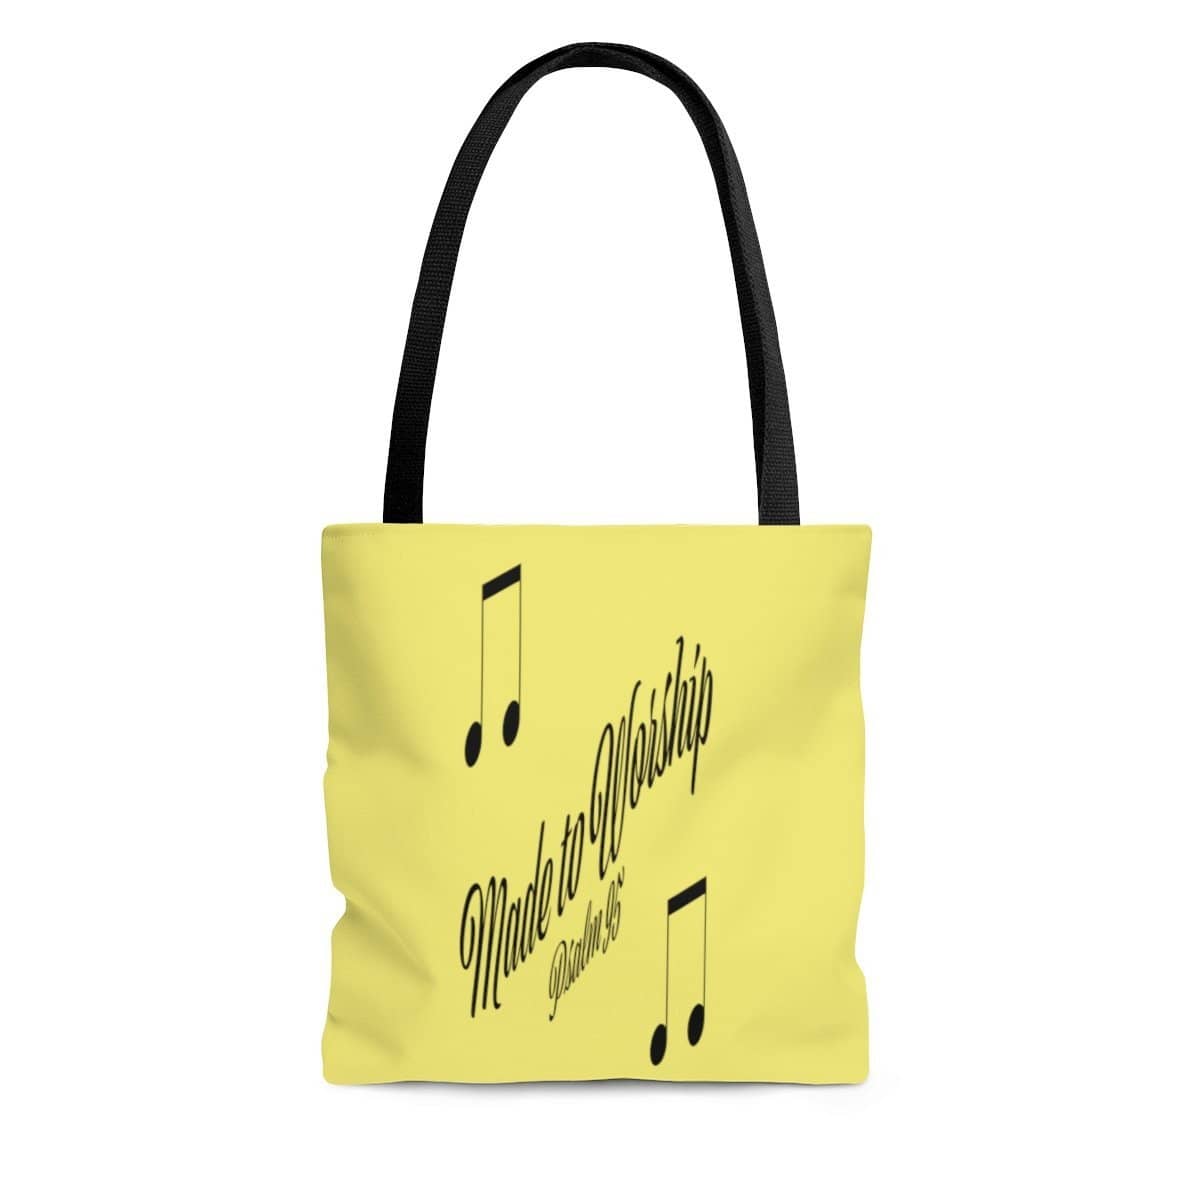 AOP Tote Bag "Made to Worship" in 3 Sizes (3509995339876)